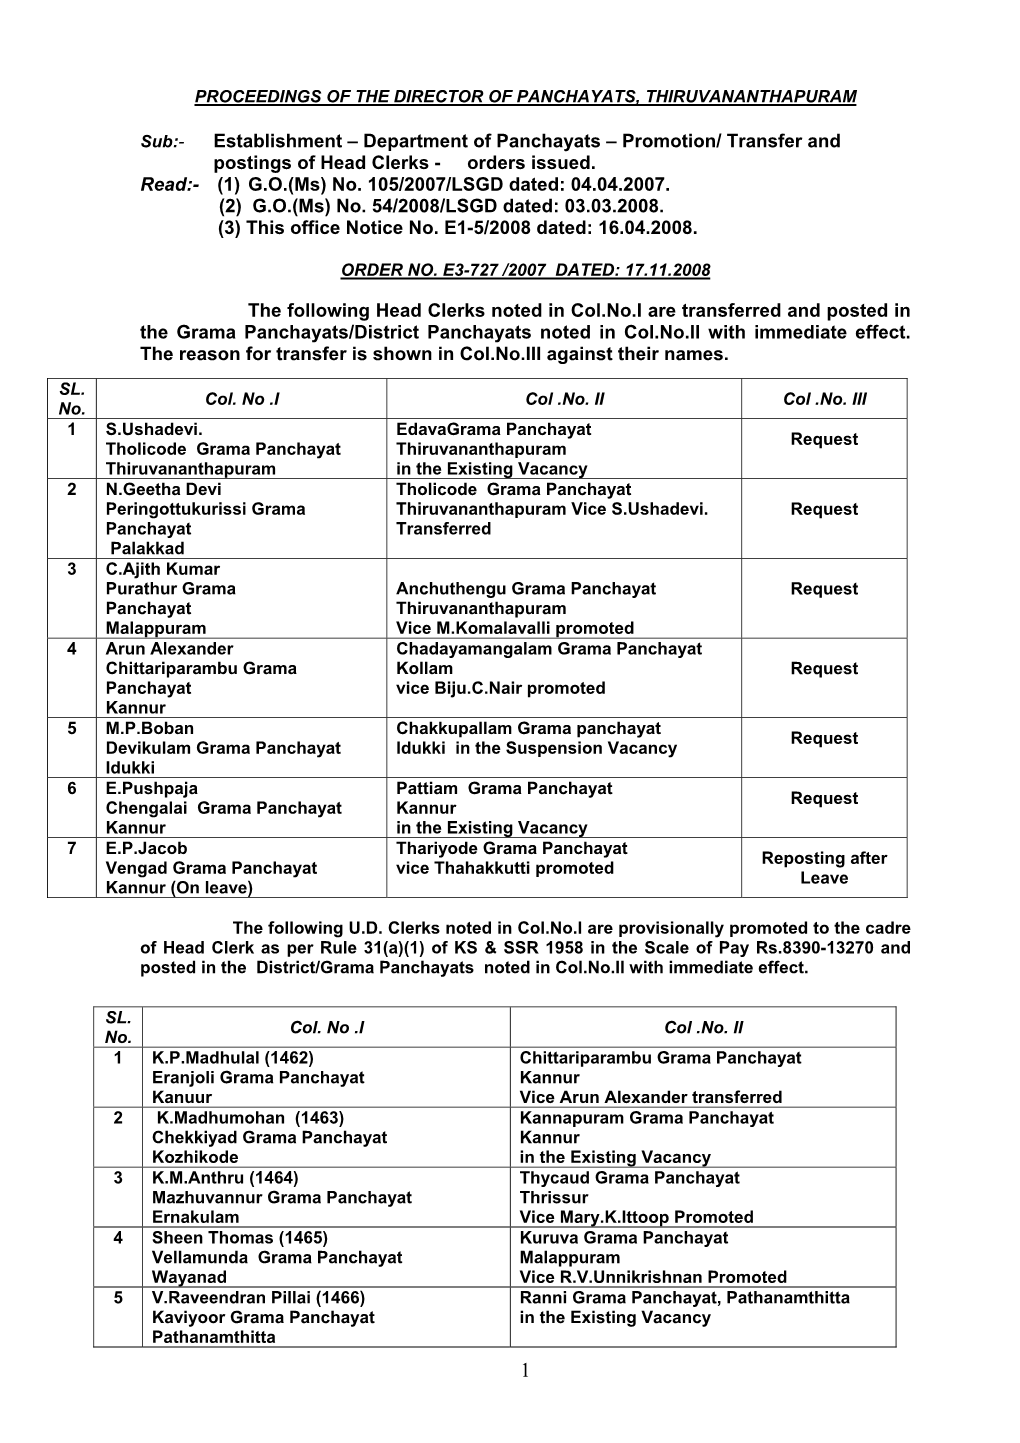 Department of Panchayats – Promotion/ Transfer and Postings of Head Clerks - Orders Issued